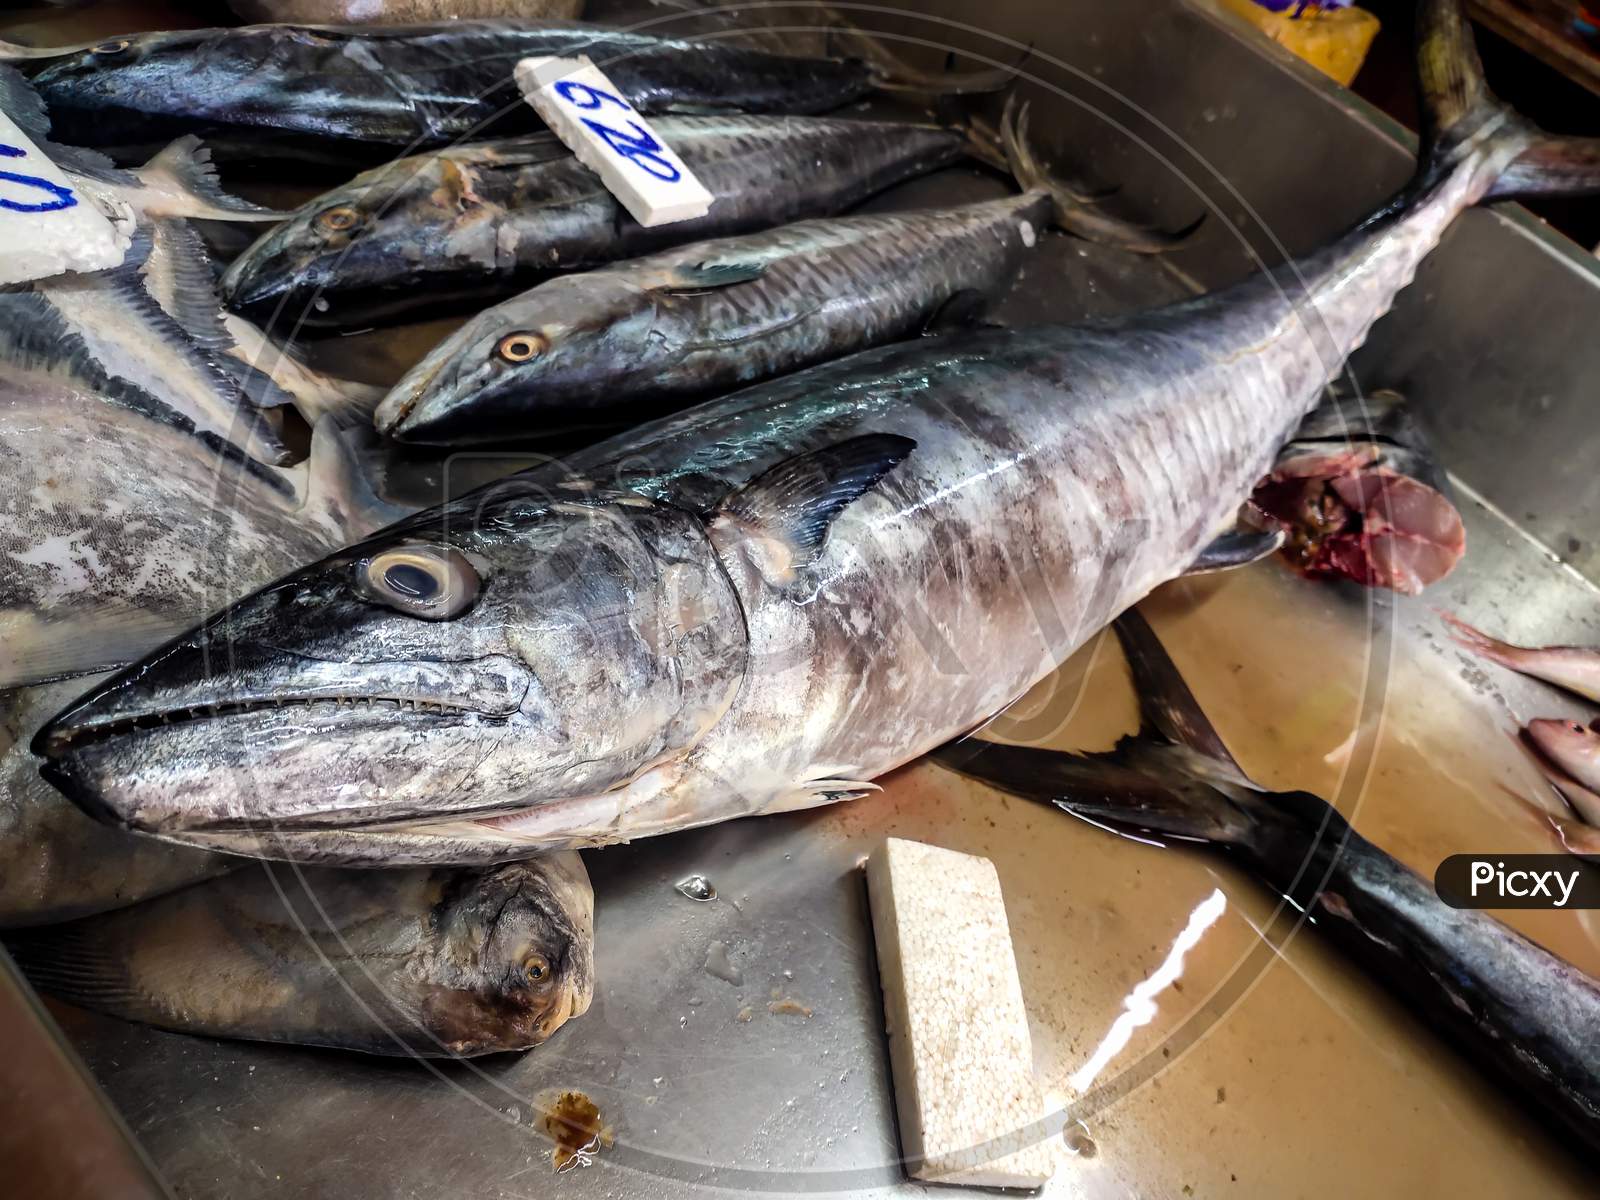 Seafood Market - Fresh Sea Fishes On Fish Market With Mentioned Rate Per Kg. Spanish Mackerels